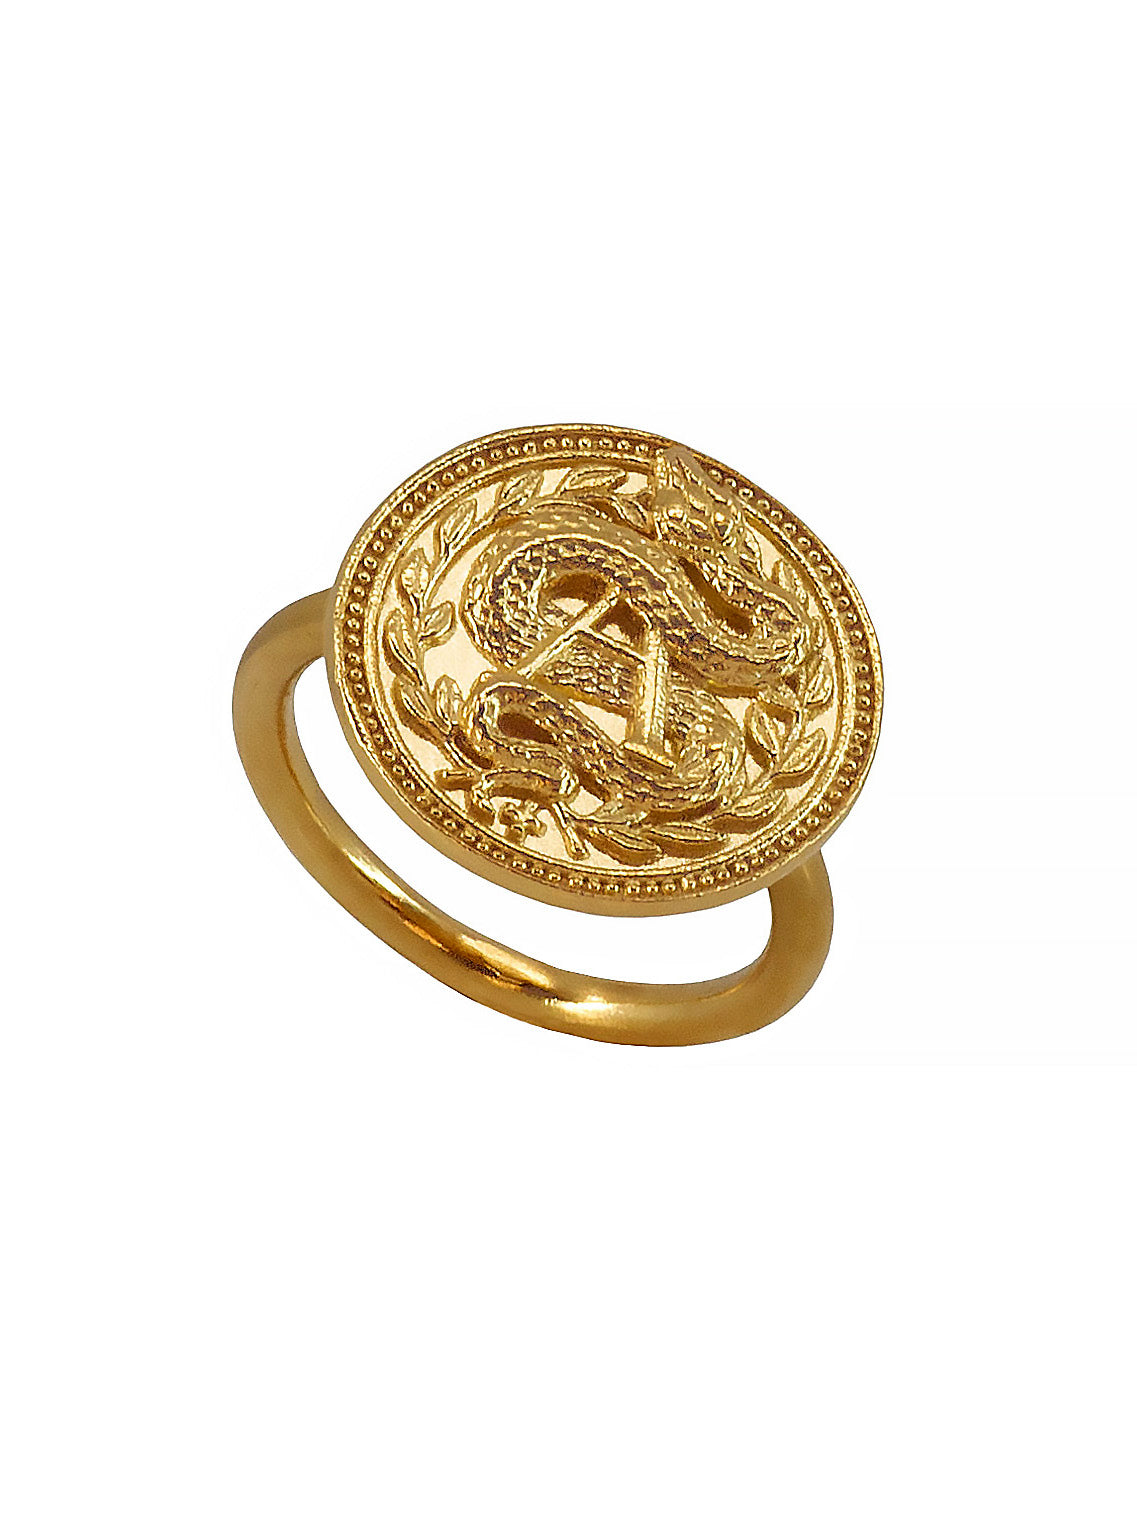 Blood type A Positive Ring. 23ct Gold plated Sterling Silver.Grupo sanguineo Anillo, Dorado